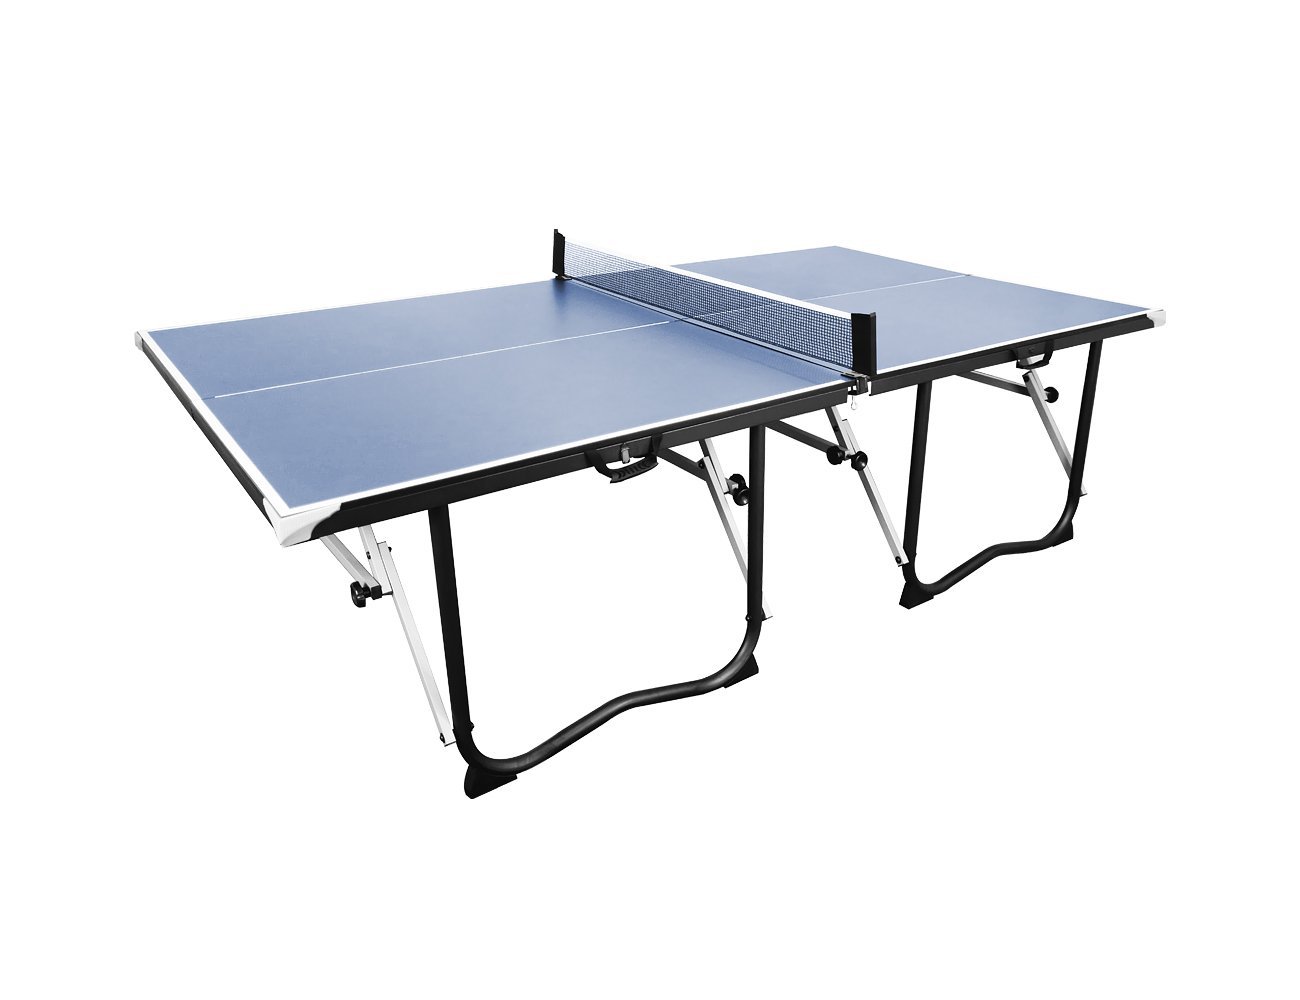 Foldable Table Tennis Table